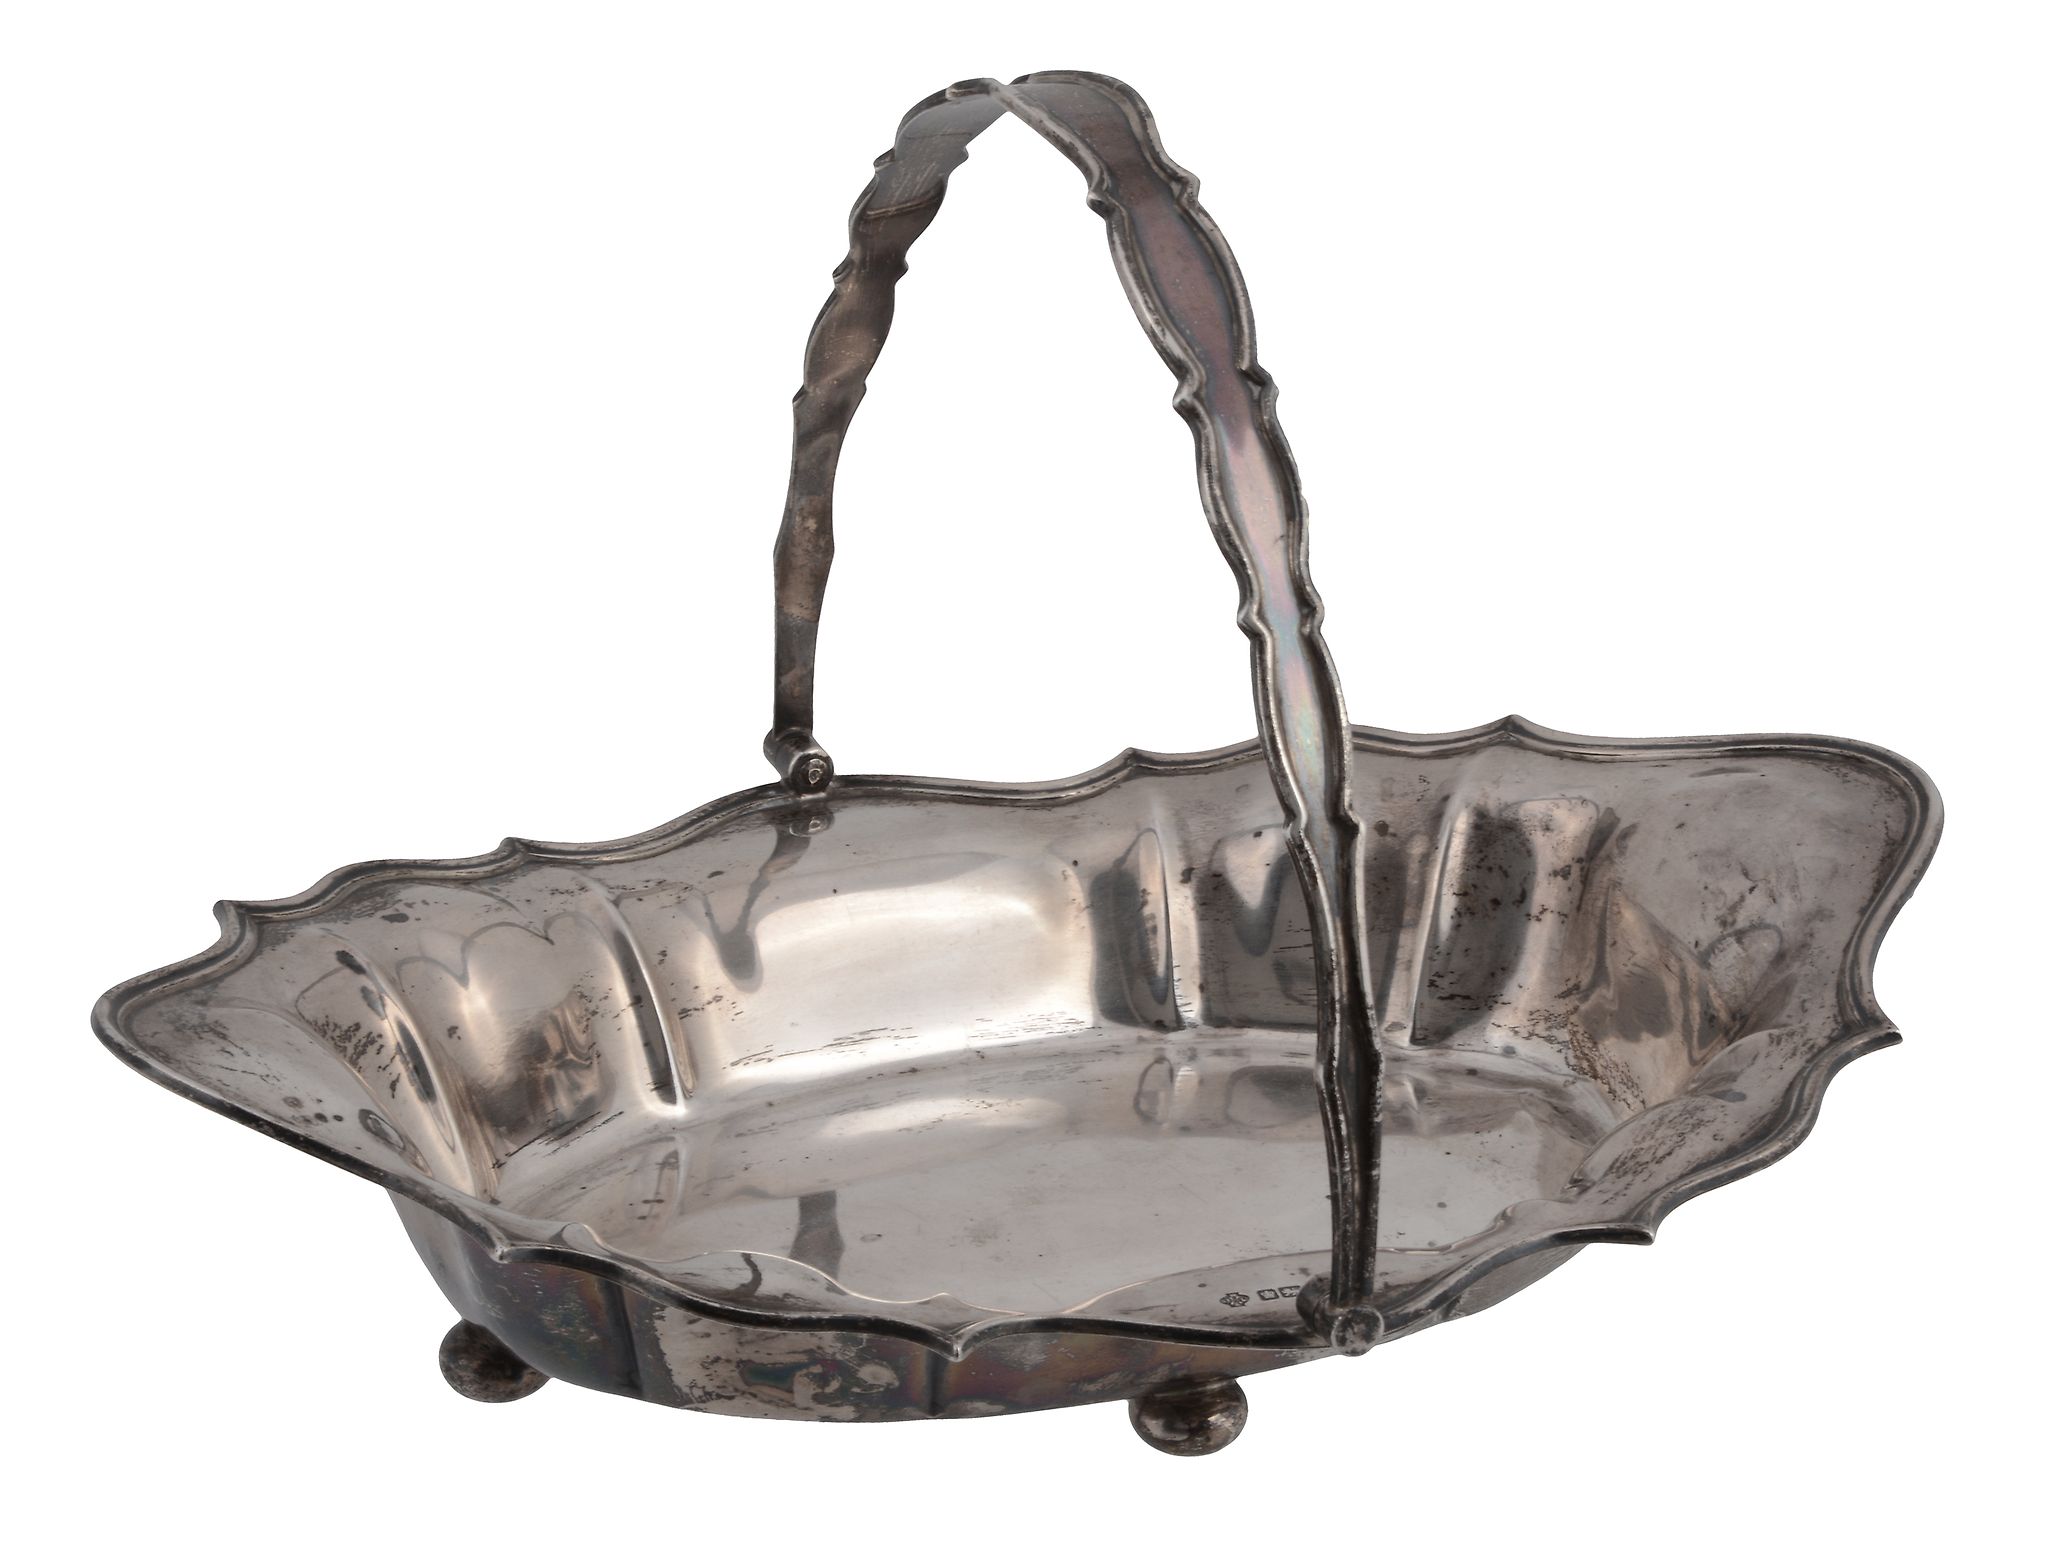 A silver swing handled basket by William Hutton & Sons, Sheffield 1910, with a swing handle, a